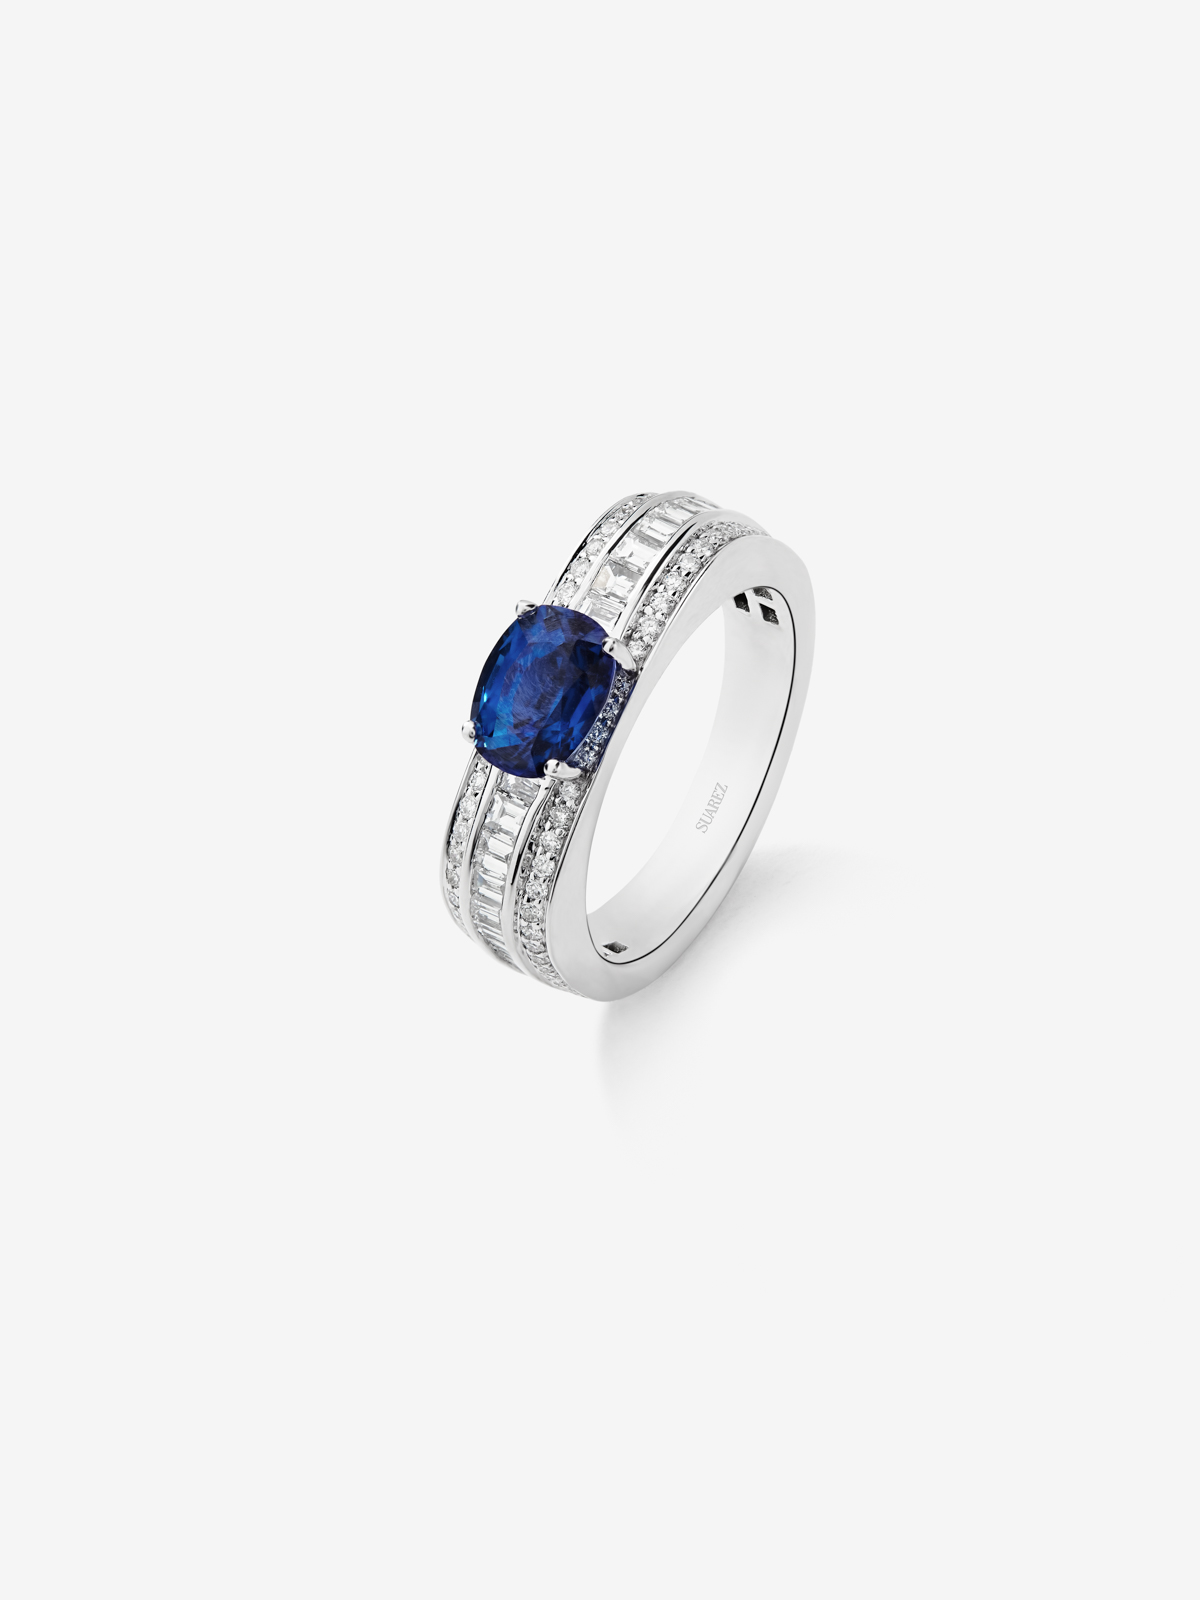 18K White Gold Ring with Royal Blue Zafiro in 1.56 cts and white diamonds in 0.71 cts